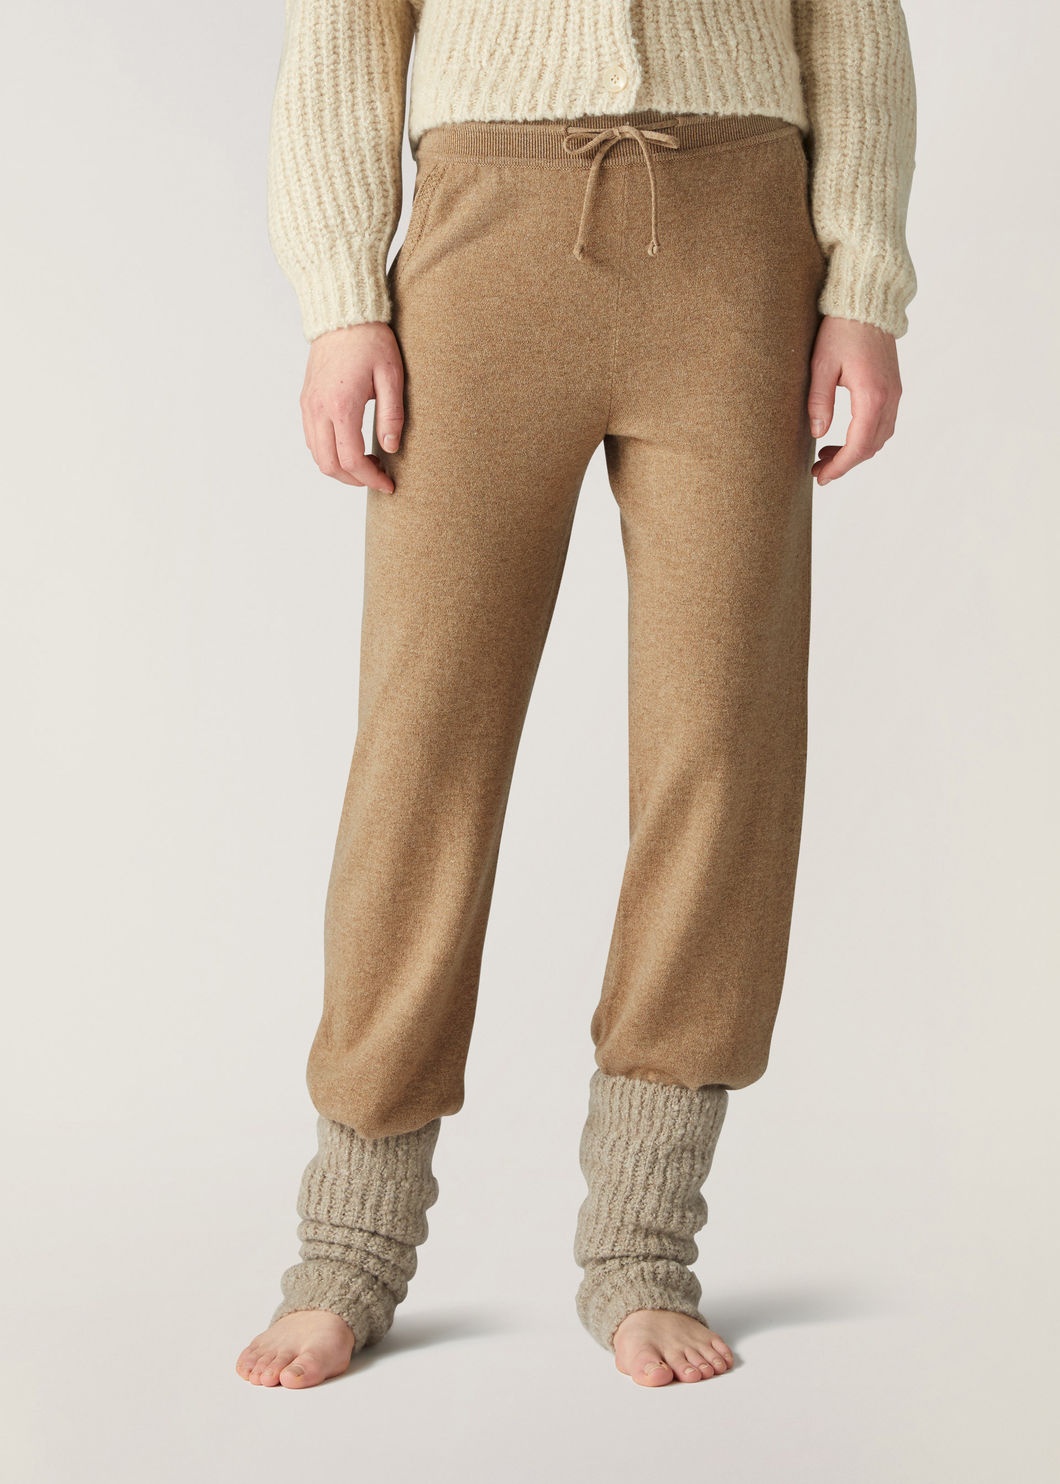 Cocooning Pants - 4